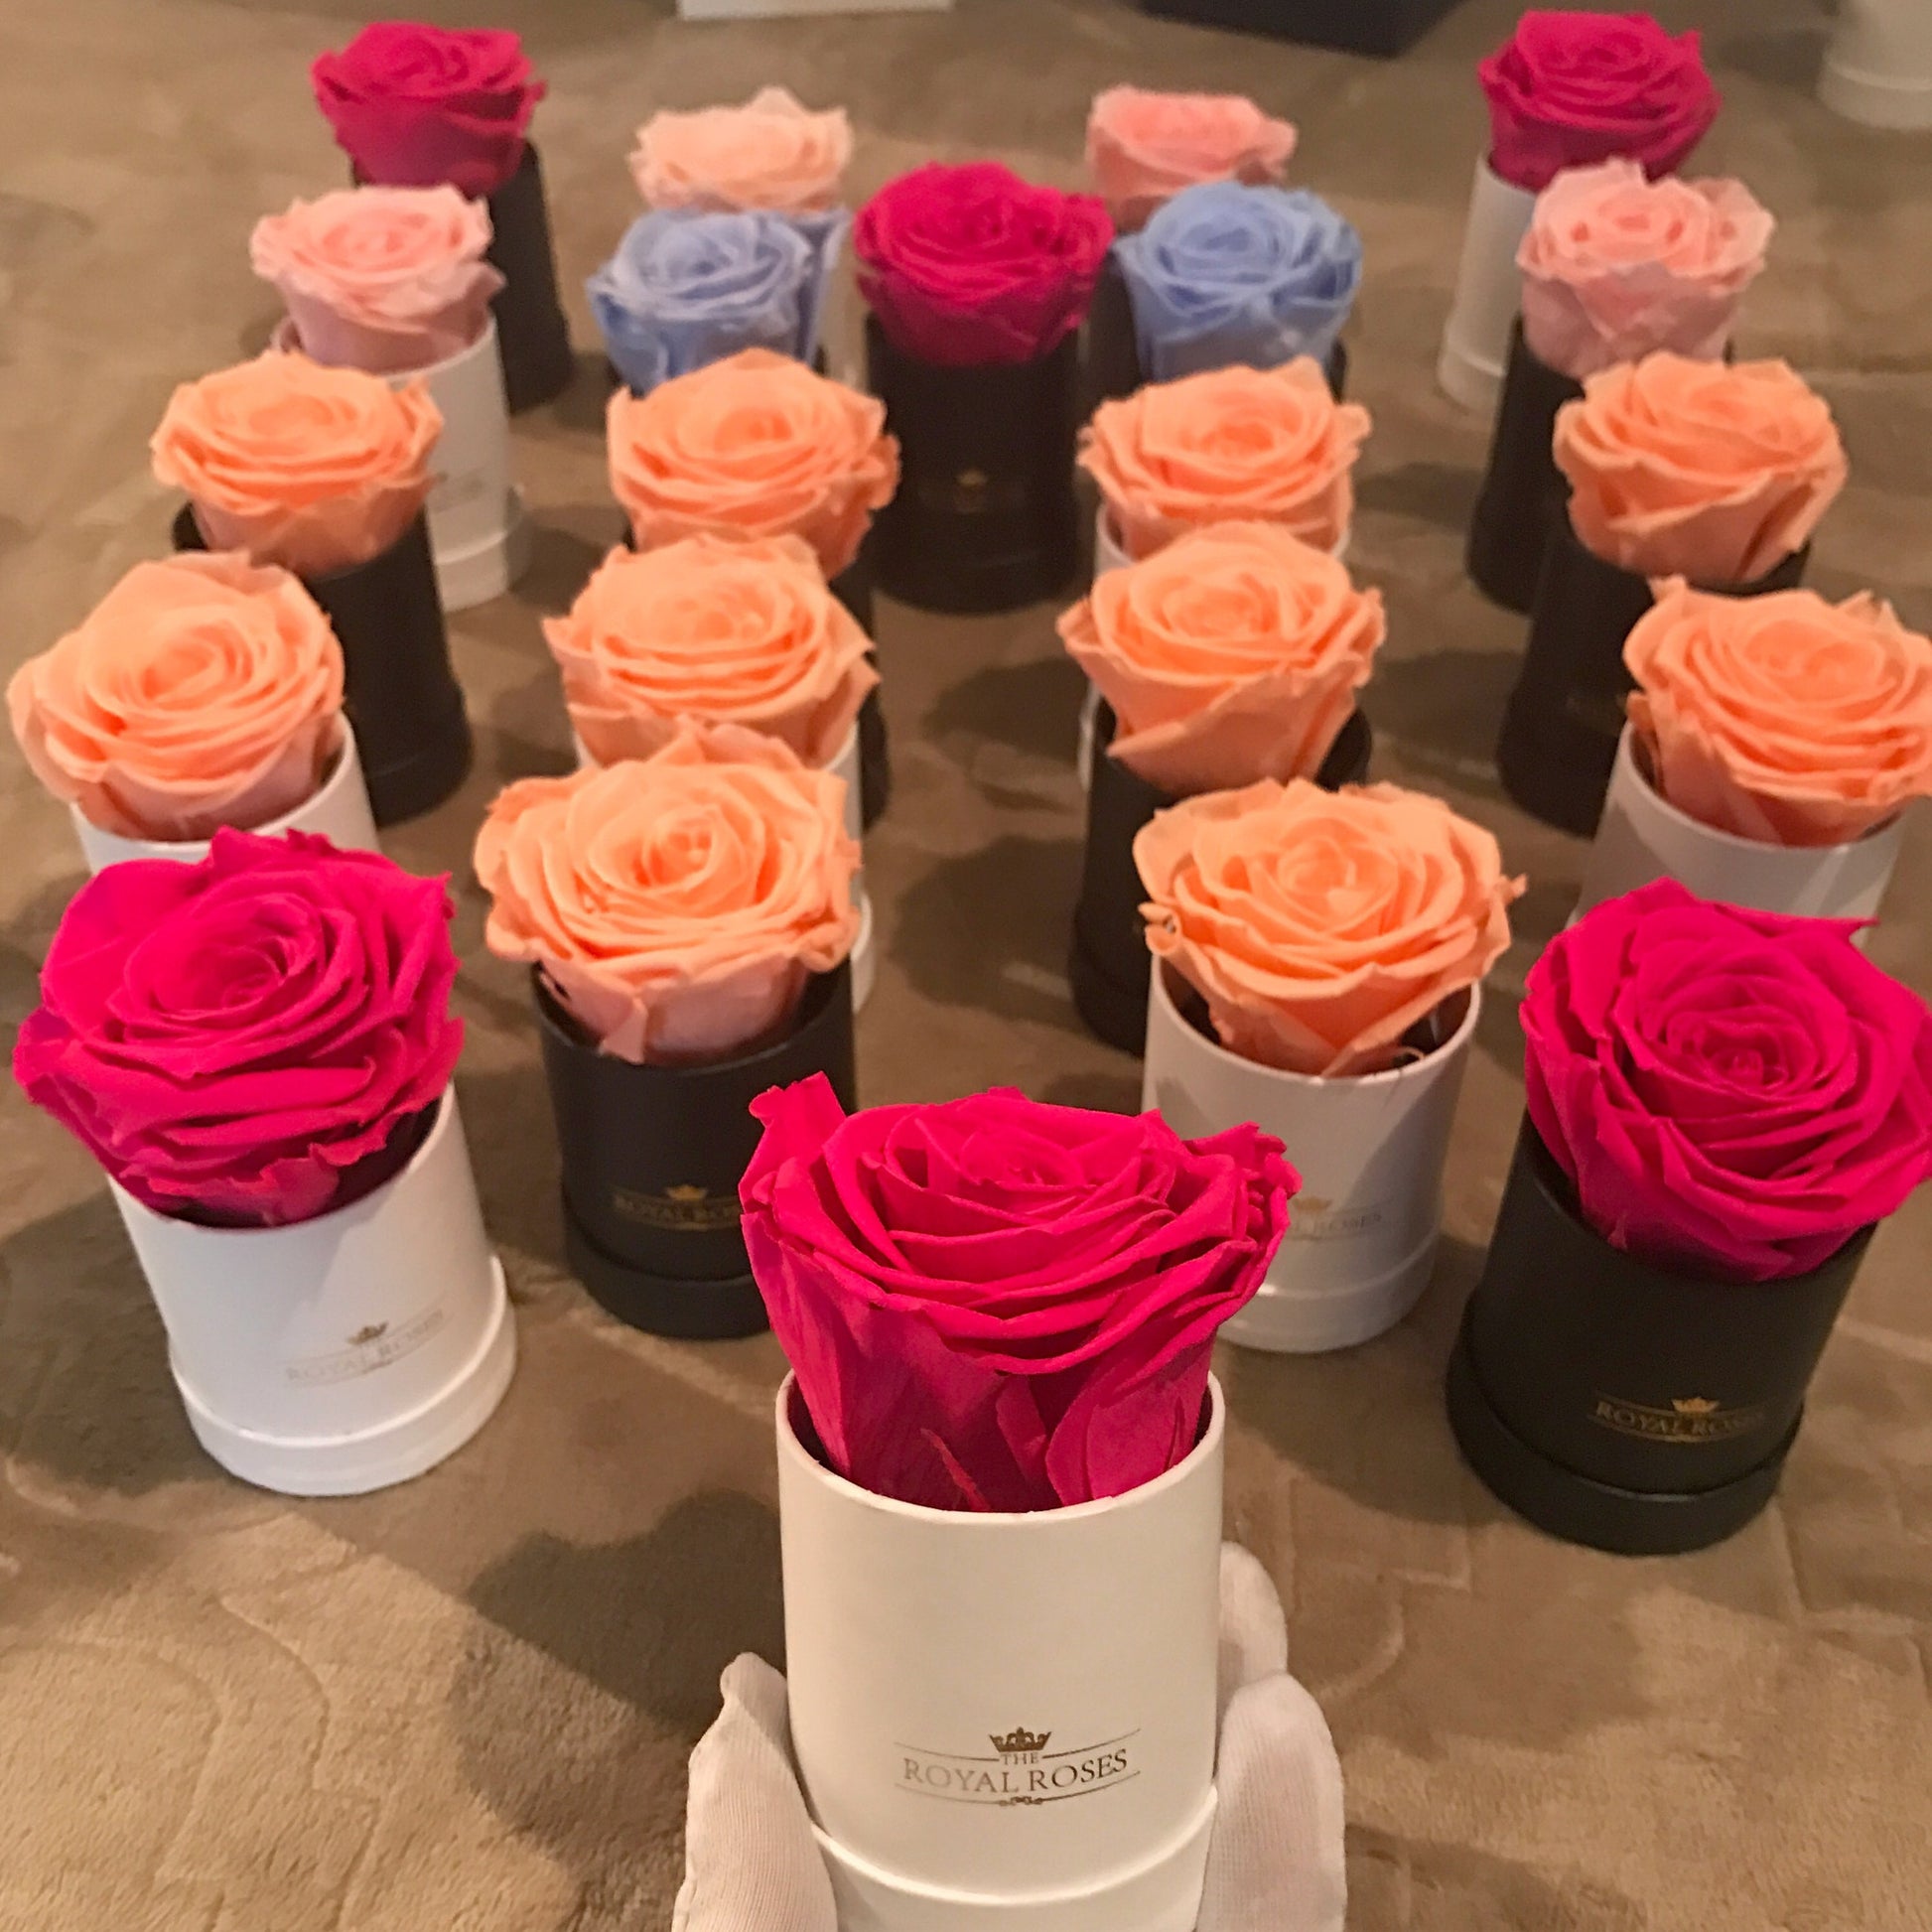 Single Long Lasting Rose Box - Lifetime is Over 1 Year - The Royal Roses 